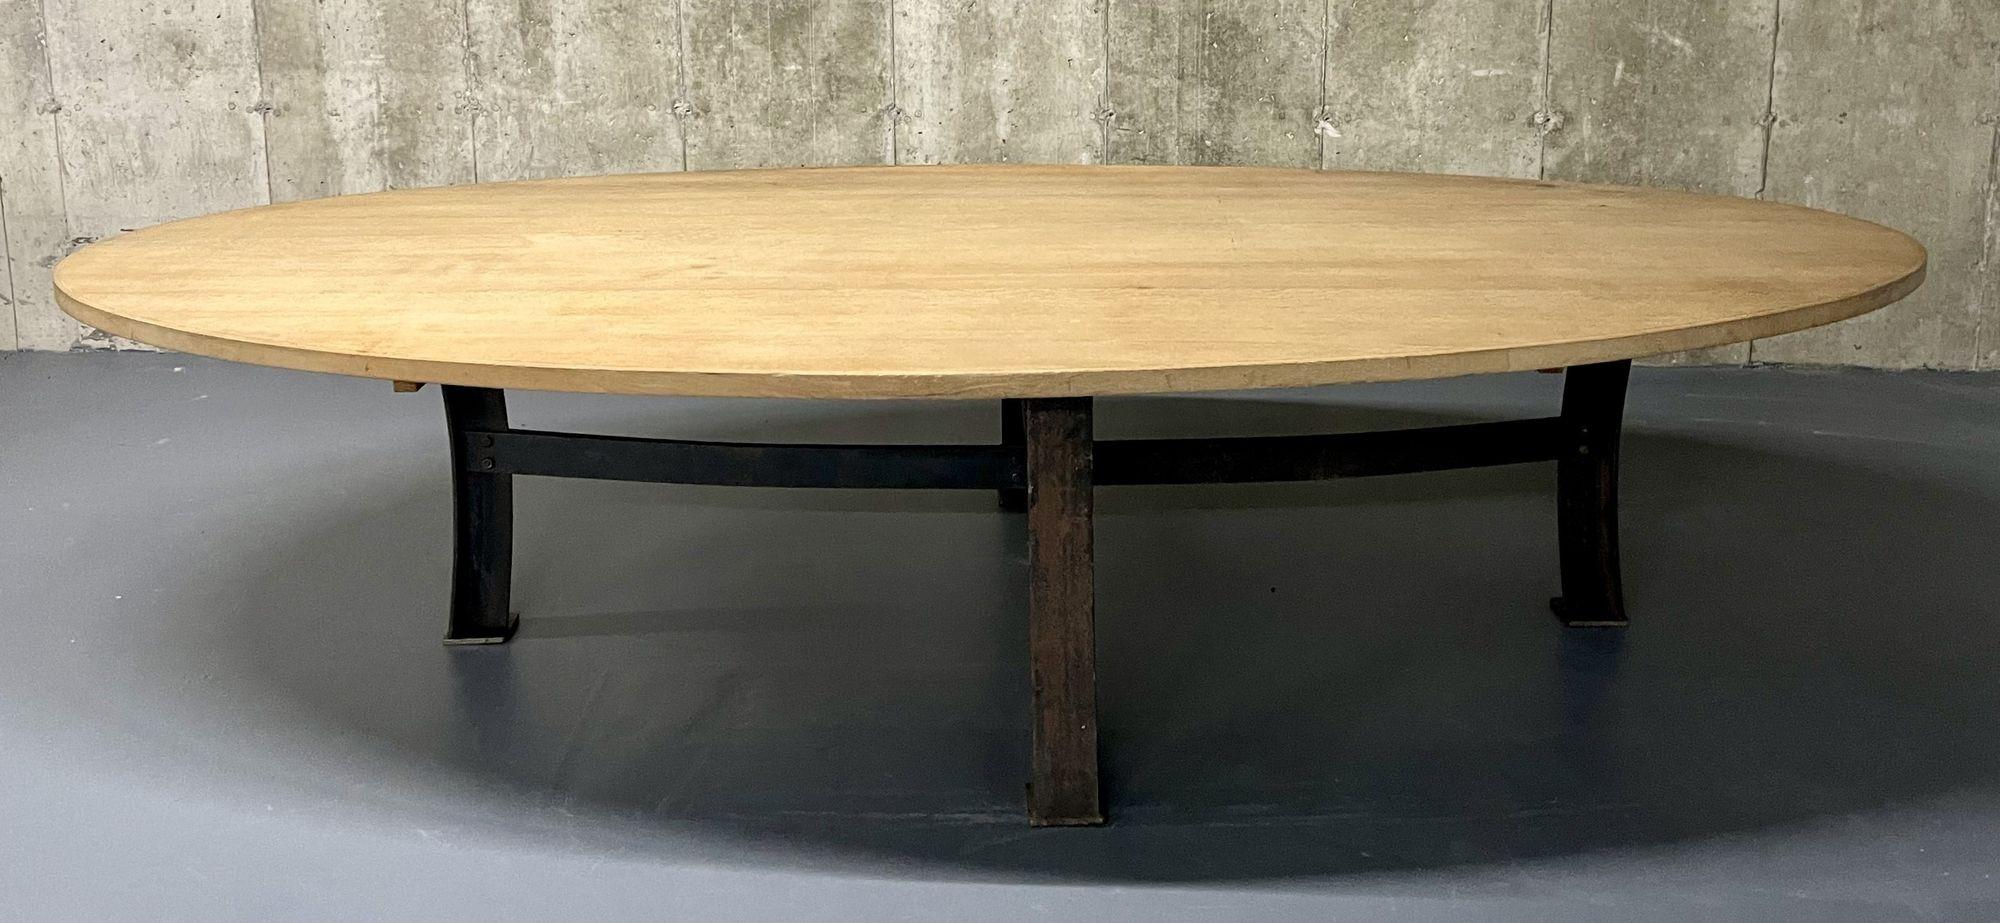 Mid Century Modern Monumental Industrial Dining, Conference Table, Oak, Steel, American. Part of our extensive collection of over forty dining tables and chair sets as seen on this site, thus why we are referred to as the King of Dining rooms.

Over